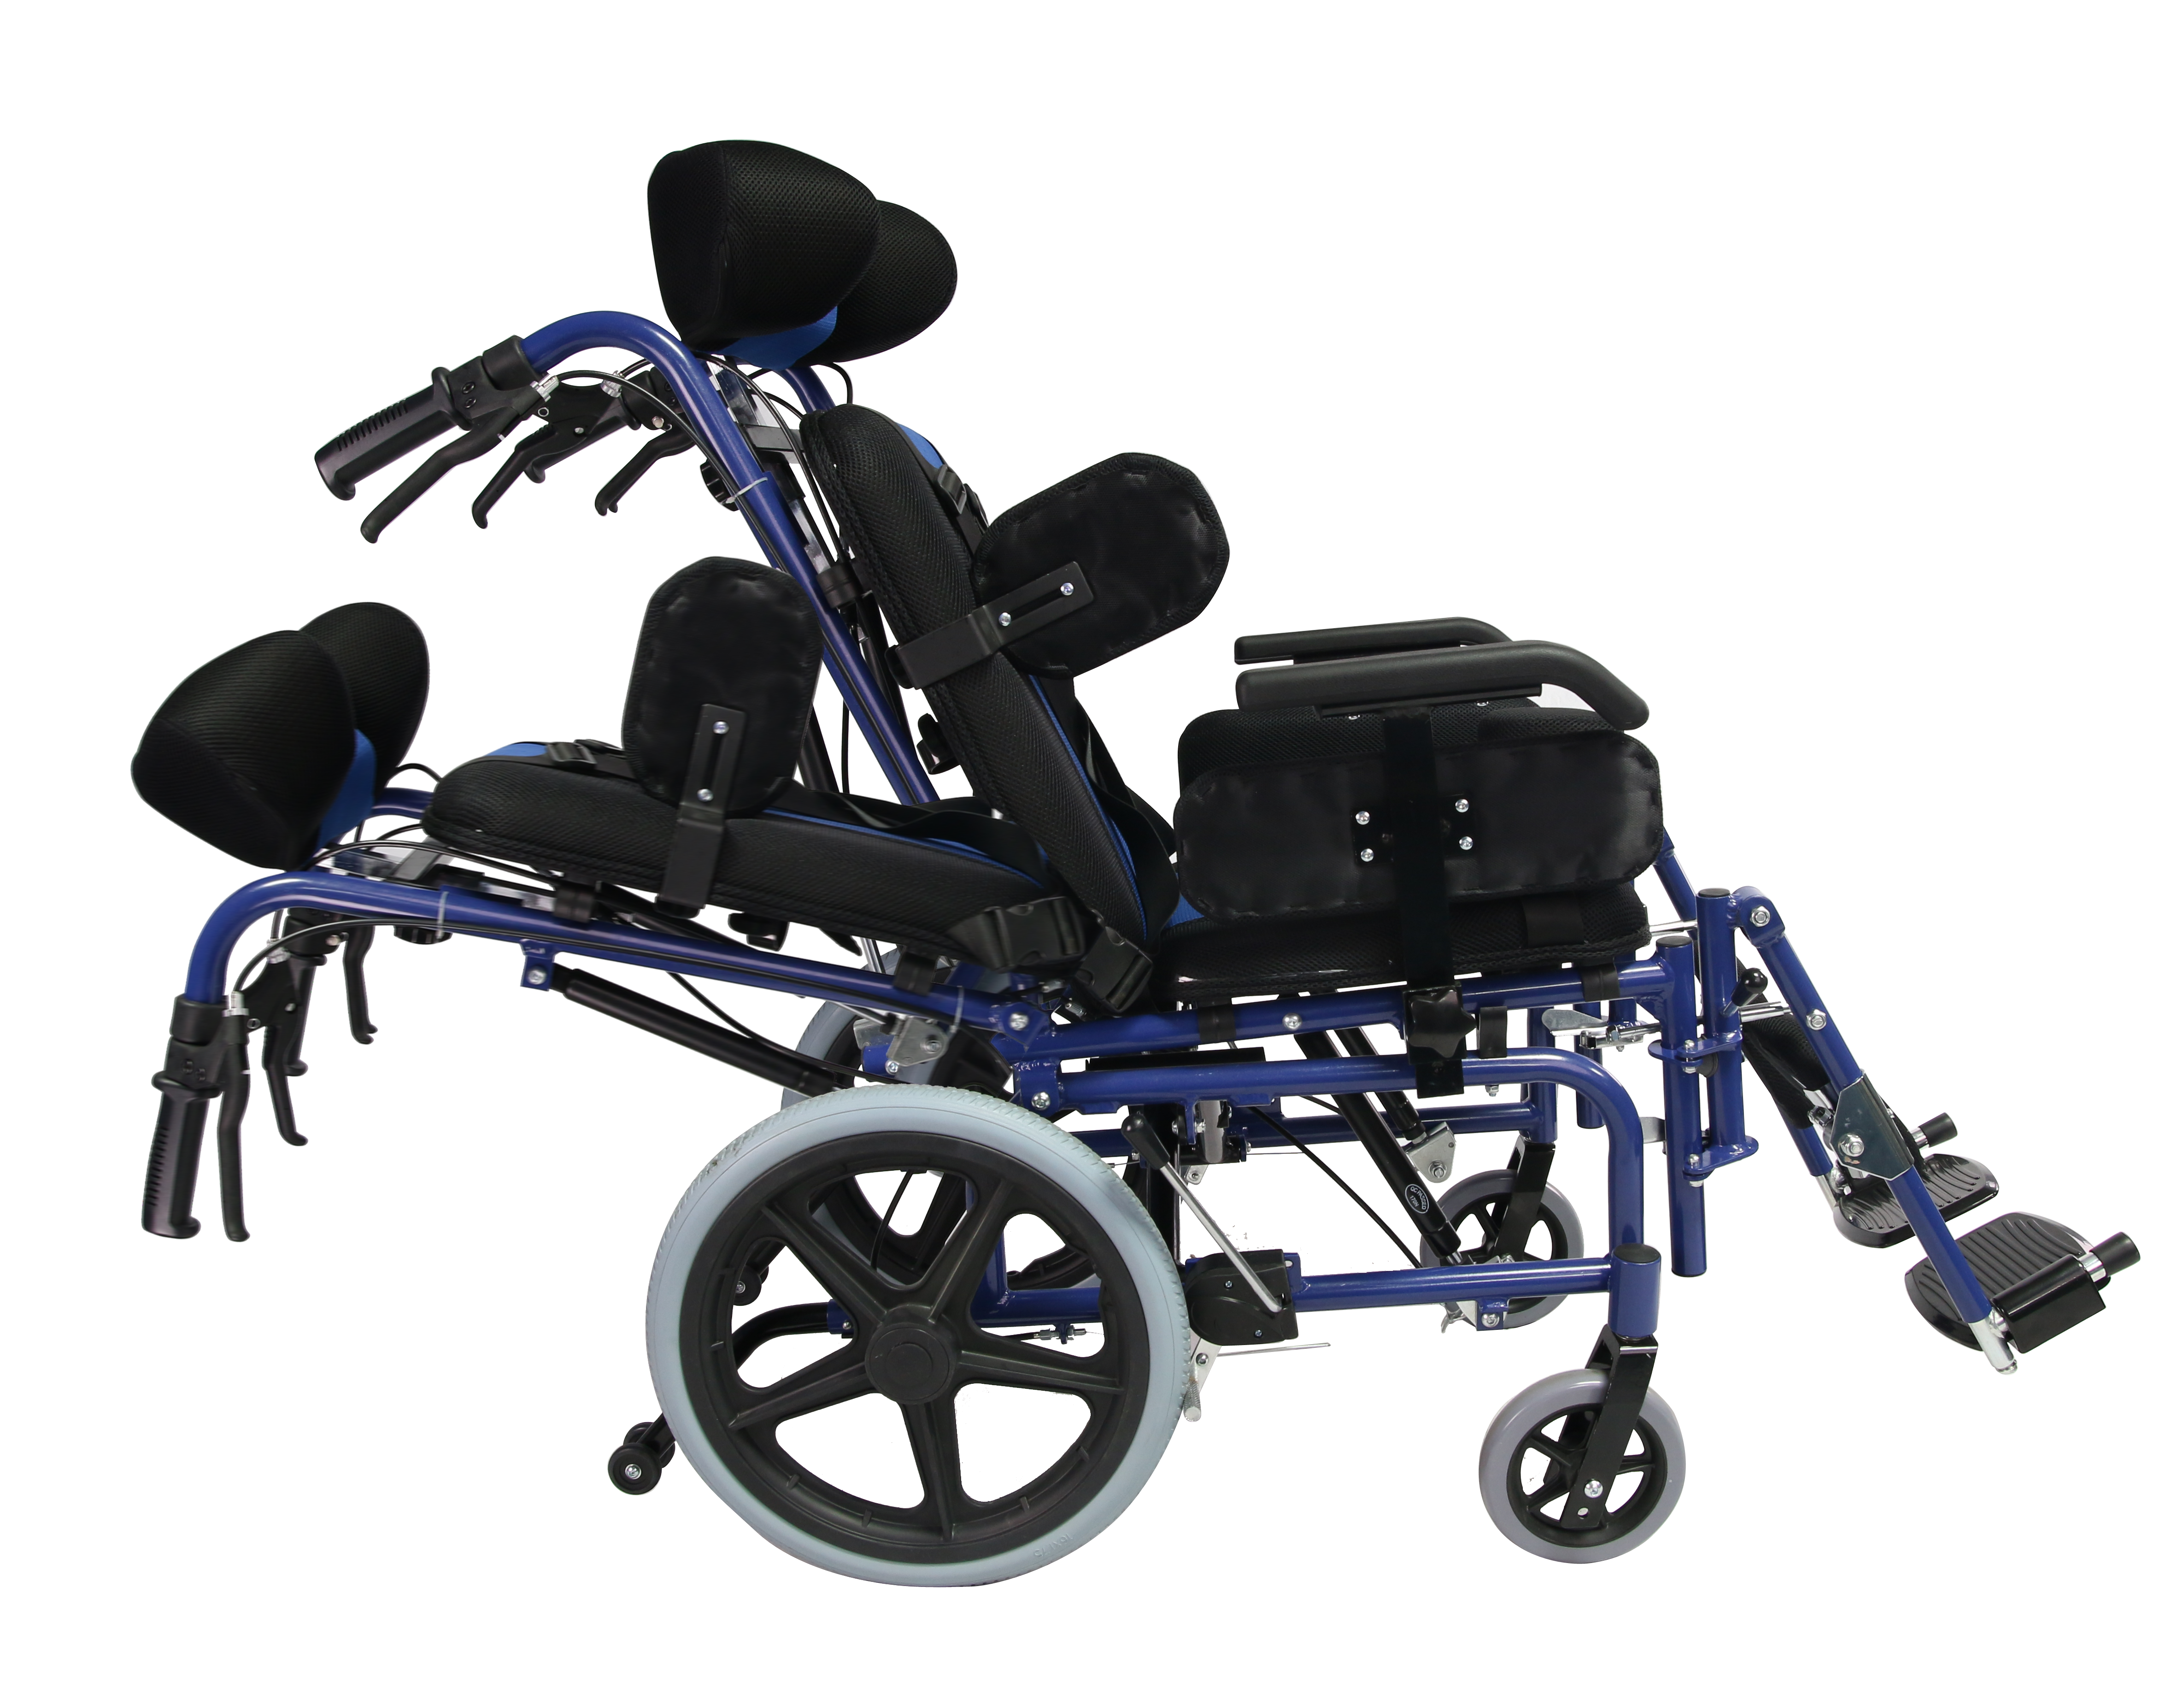 Assitance Positioning Wheelchair For Cerebral Palsy Manufacturers, Assitance Positioning Wheelchair For Cerebral Palsy Factory, Supply Assitance Positioning Wheelchair For Cerebral Palsy